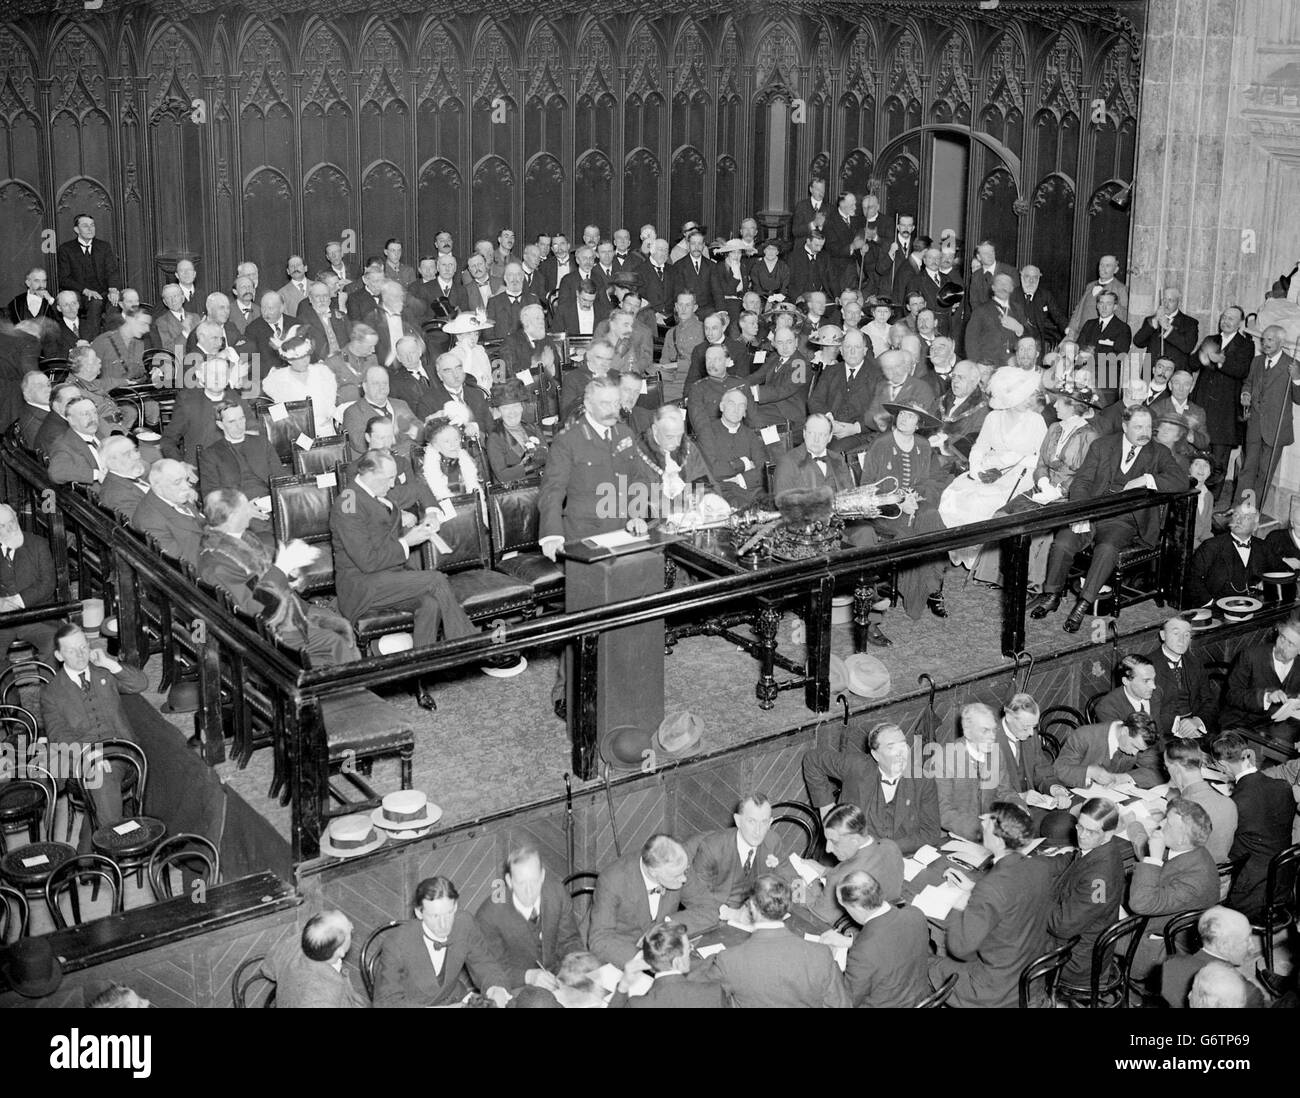 Lord Kitchener making his great recruiting speech at the Guildhall. (l-r): Sir Edward Carson, Lord Kitchener, The Lord Mayor of London, the Bishop of London, Winston Churchill, Mrs Churchill and extreme right, on the platform, Lord Derby. Stock Photo